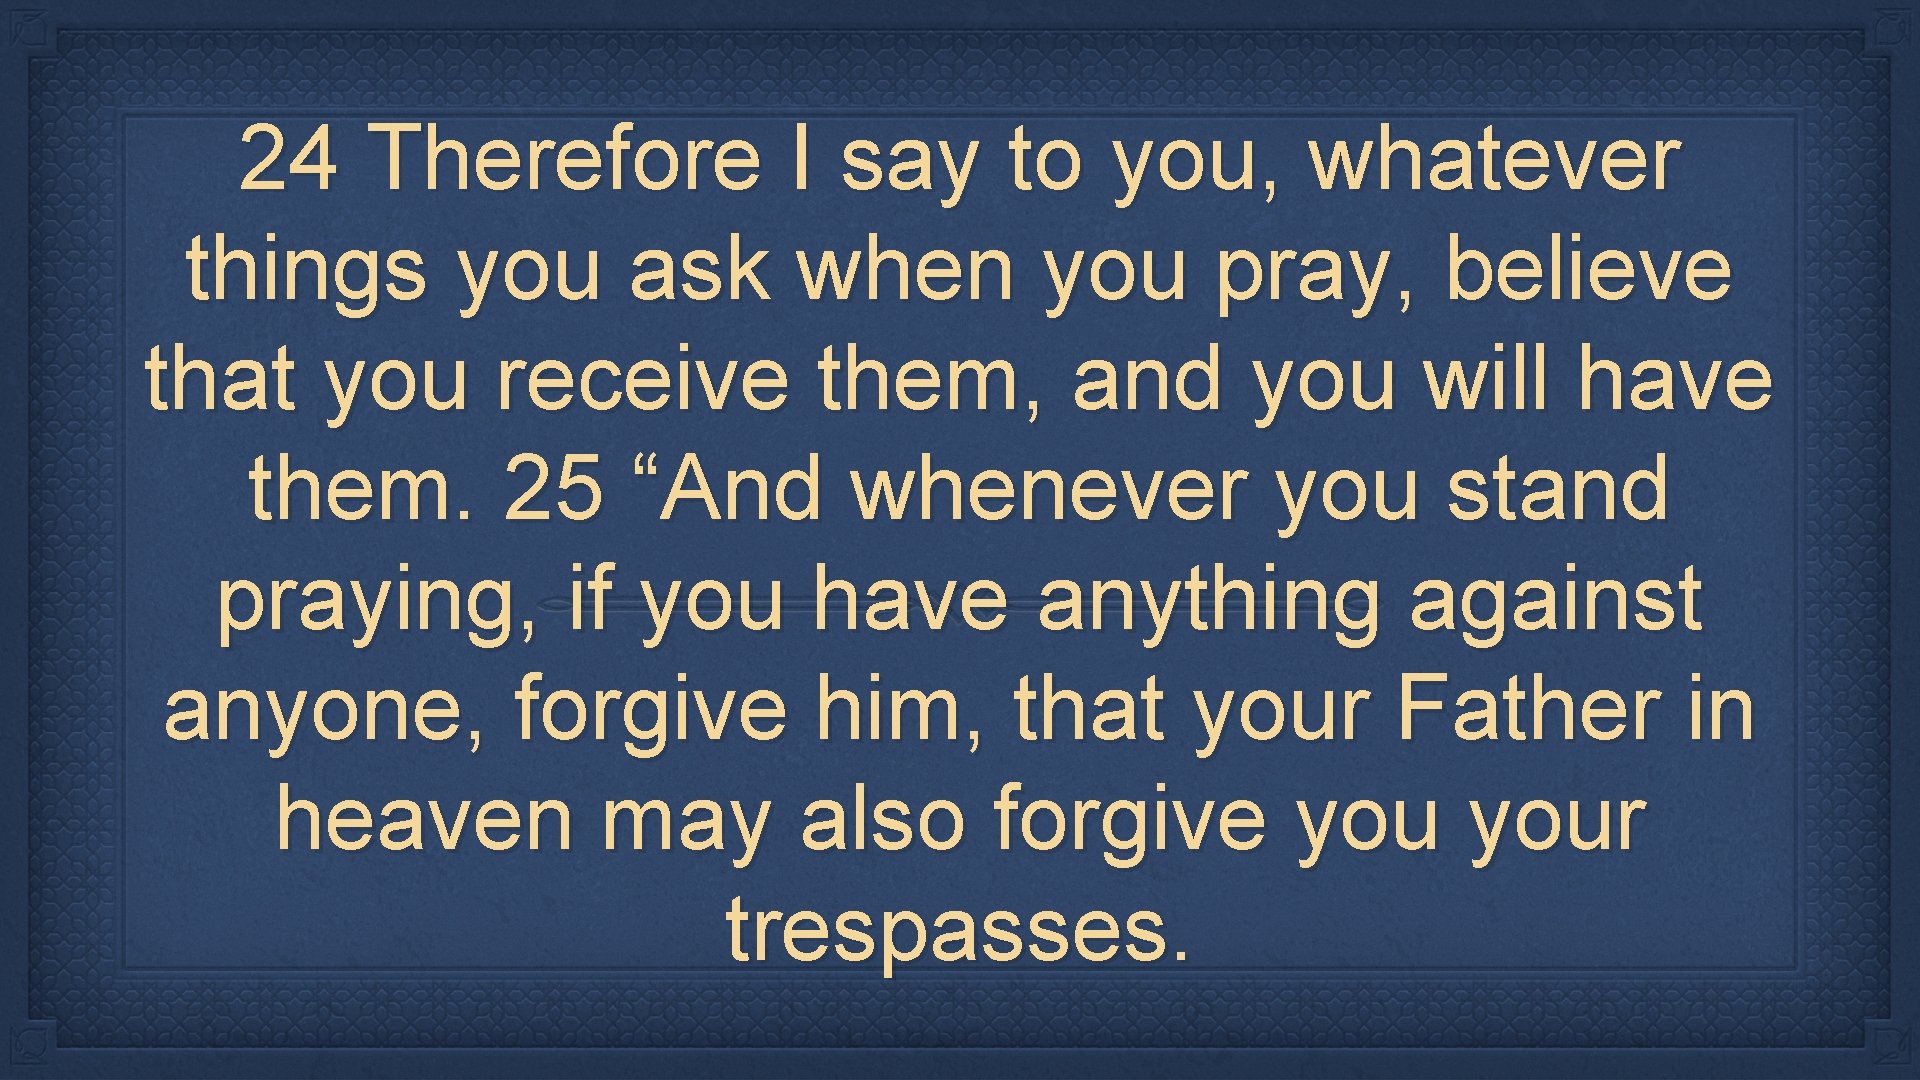 24 Therefore I say to you, whatever things you ask when you pray, believe